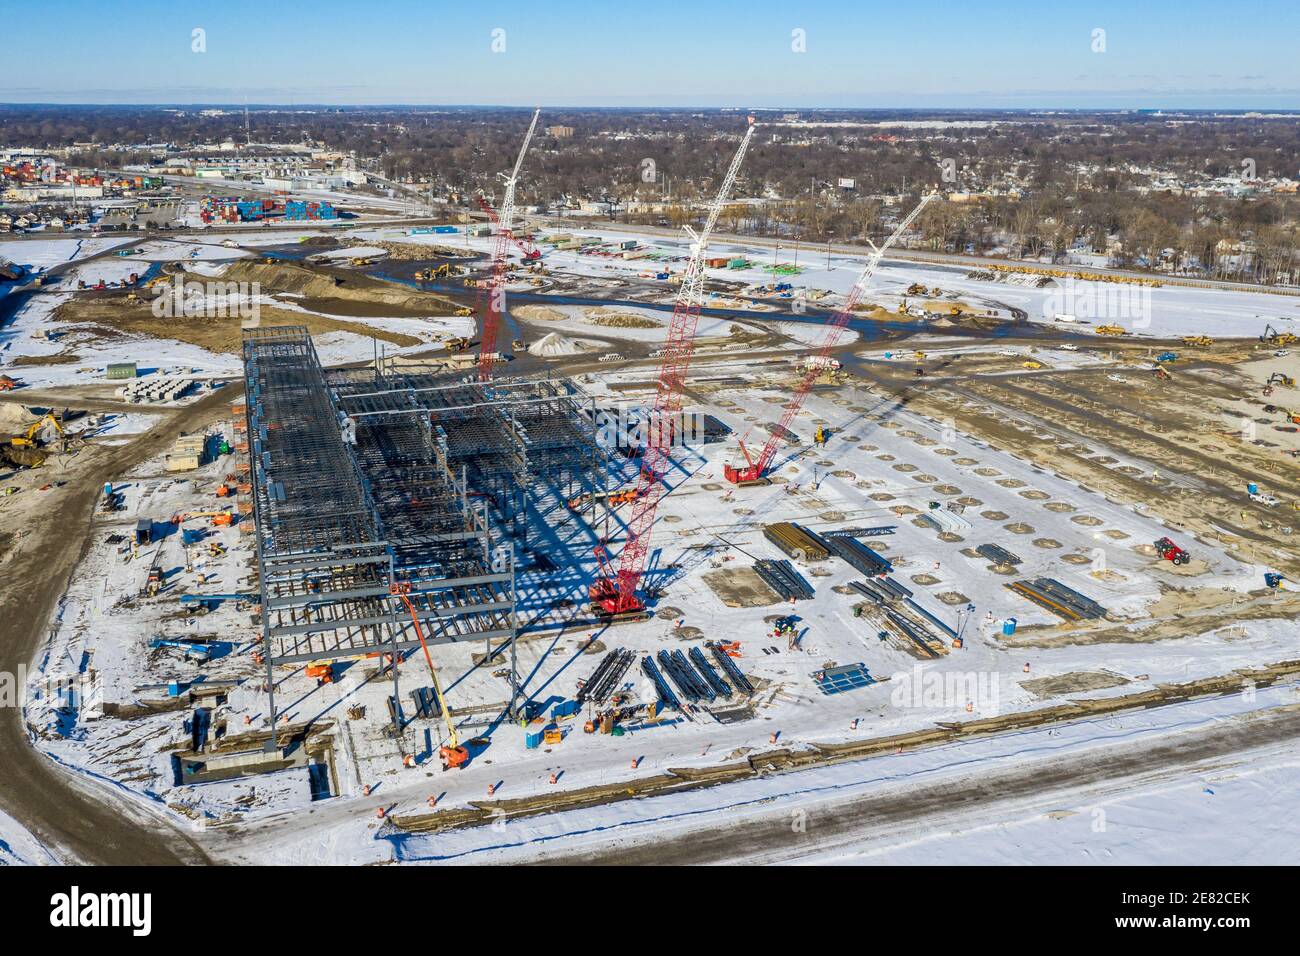 Detroit, Michigan, USA. 29th Jan, 2020. Construction is underway on a $400  million Amazon.com distribution center on the site of the former Michigan  State Fairgrounds. It will be the largest Amazon facility